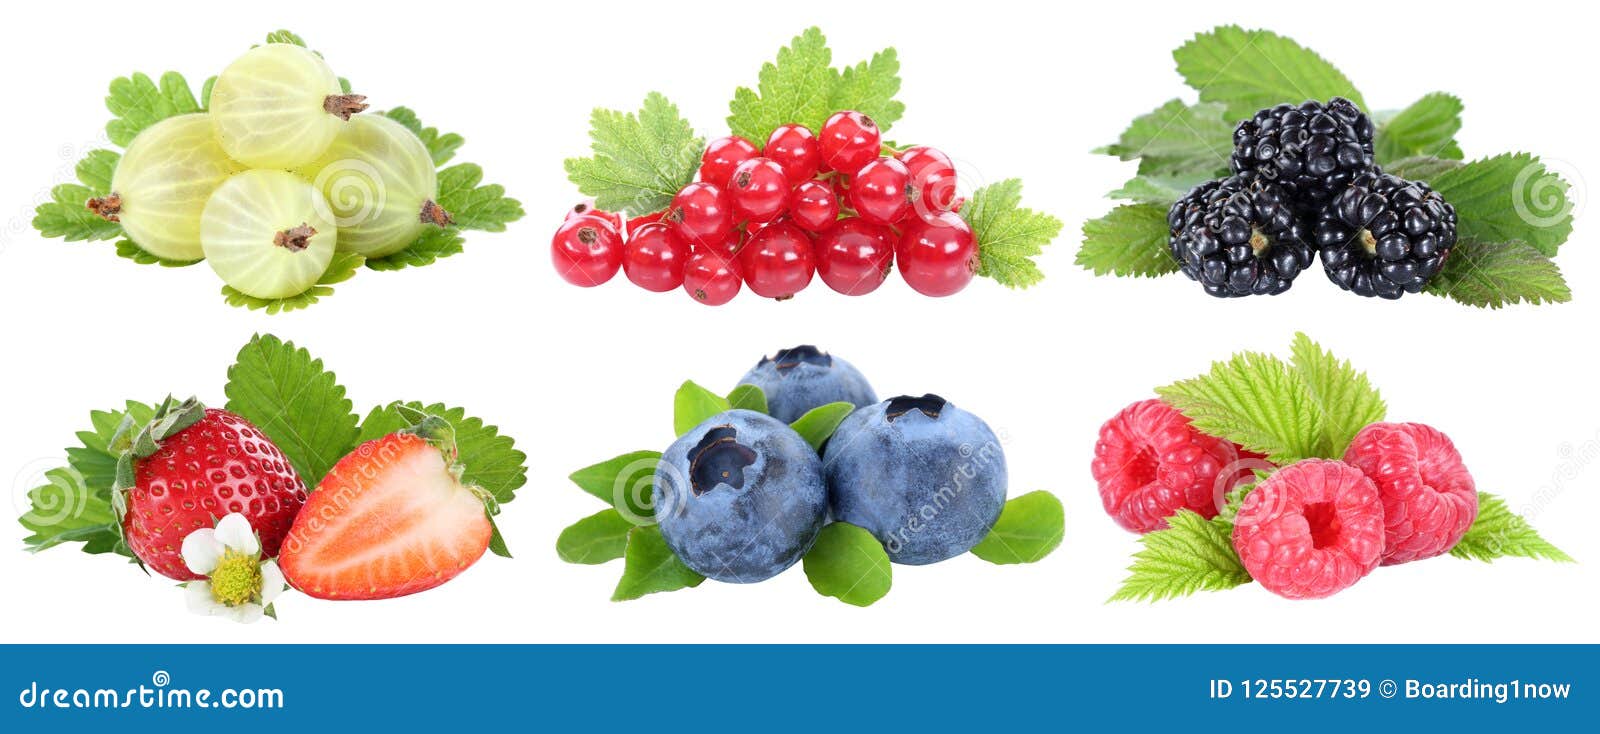 collection of berries strawberries blueberries berry fruits fruit  on white